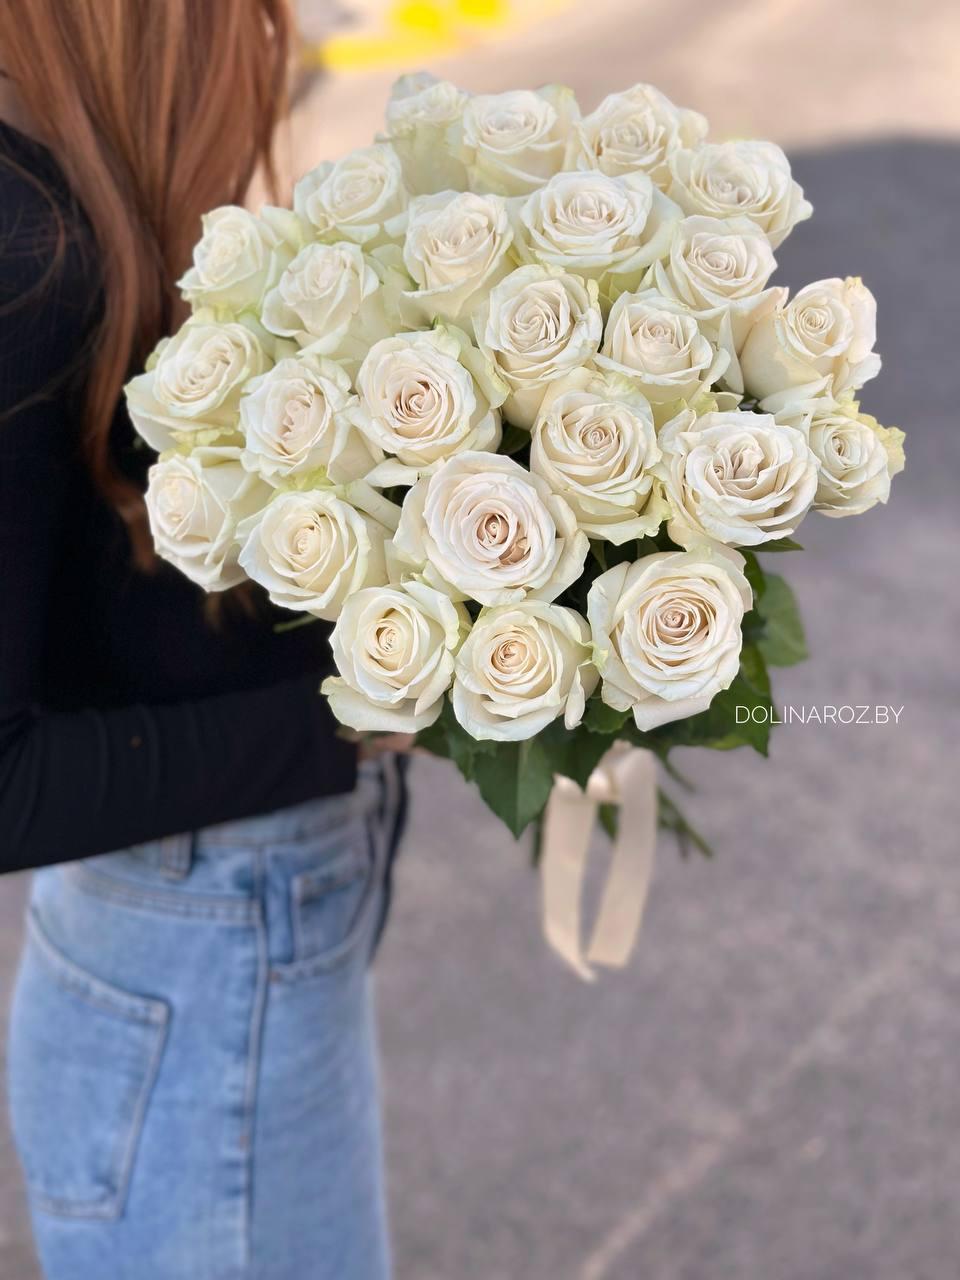 Bouquet of roses "Tender"